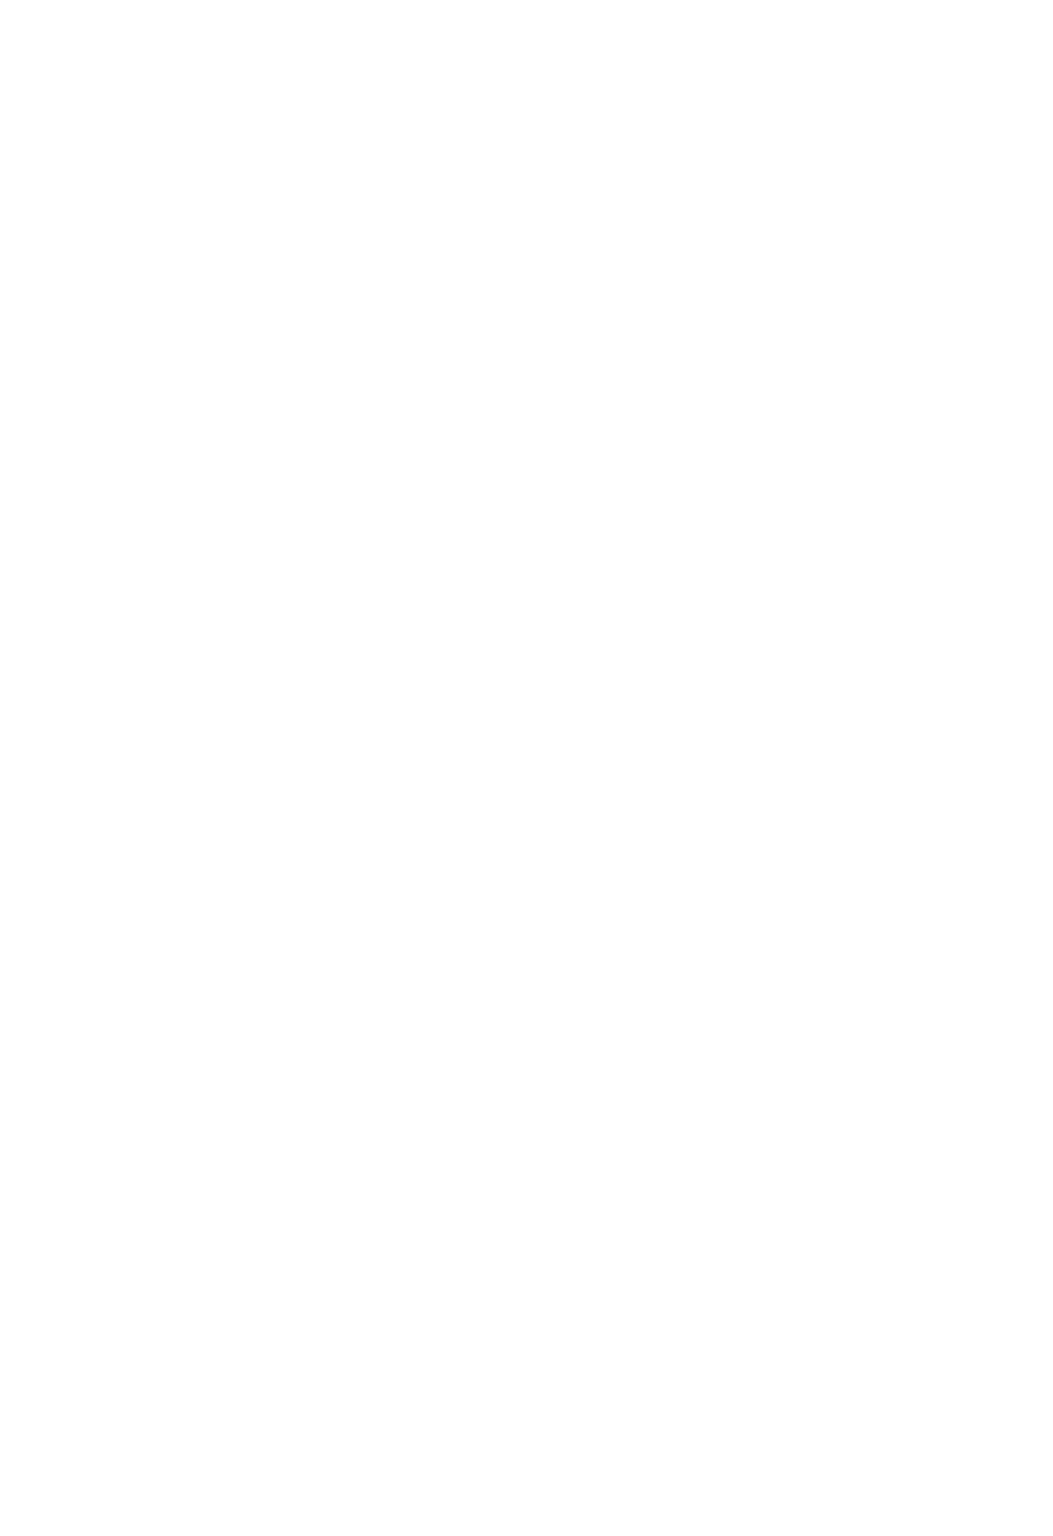 A mobile solar panel on a light tower designed by EcoQuip.